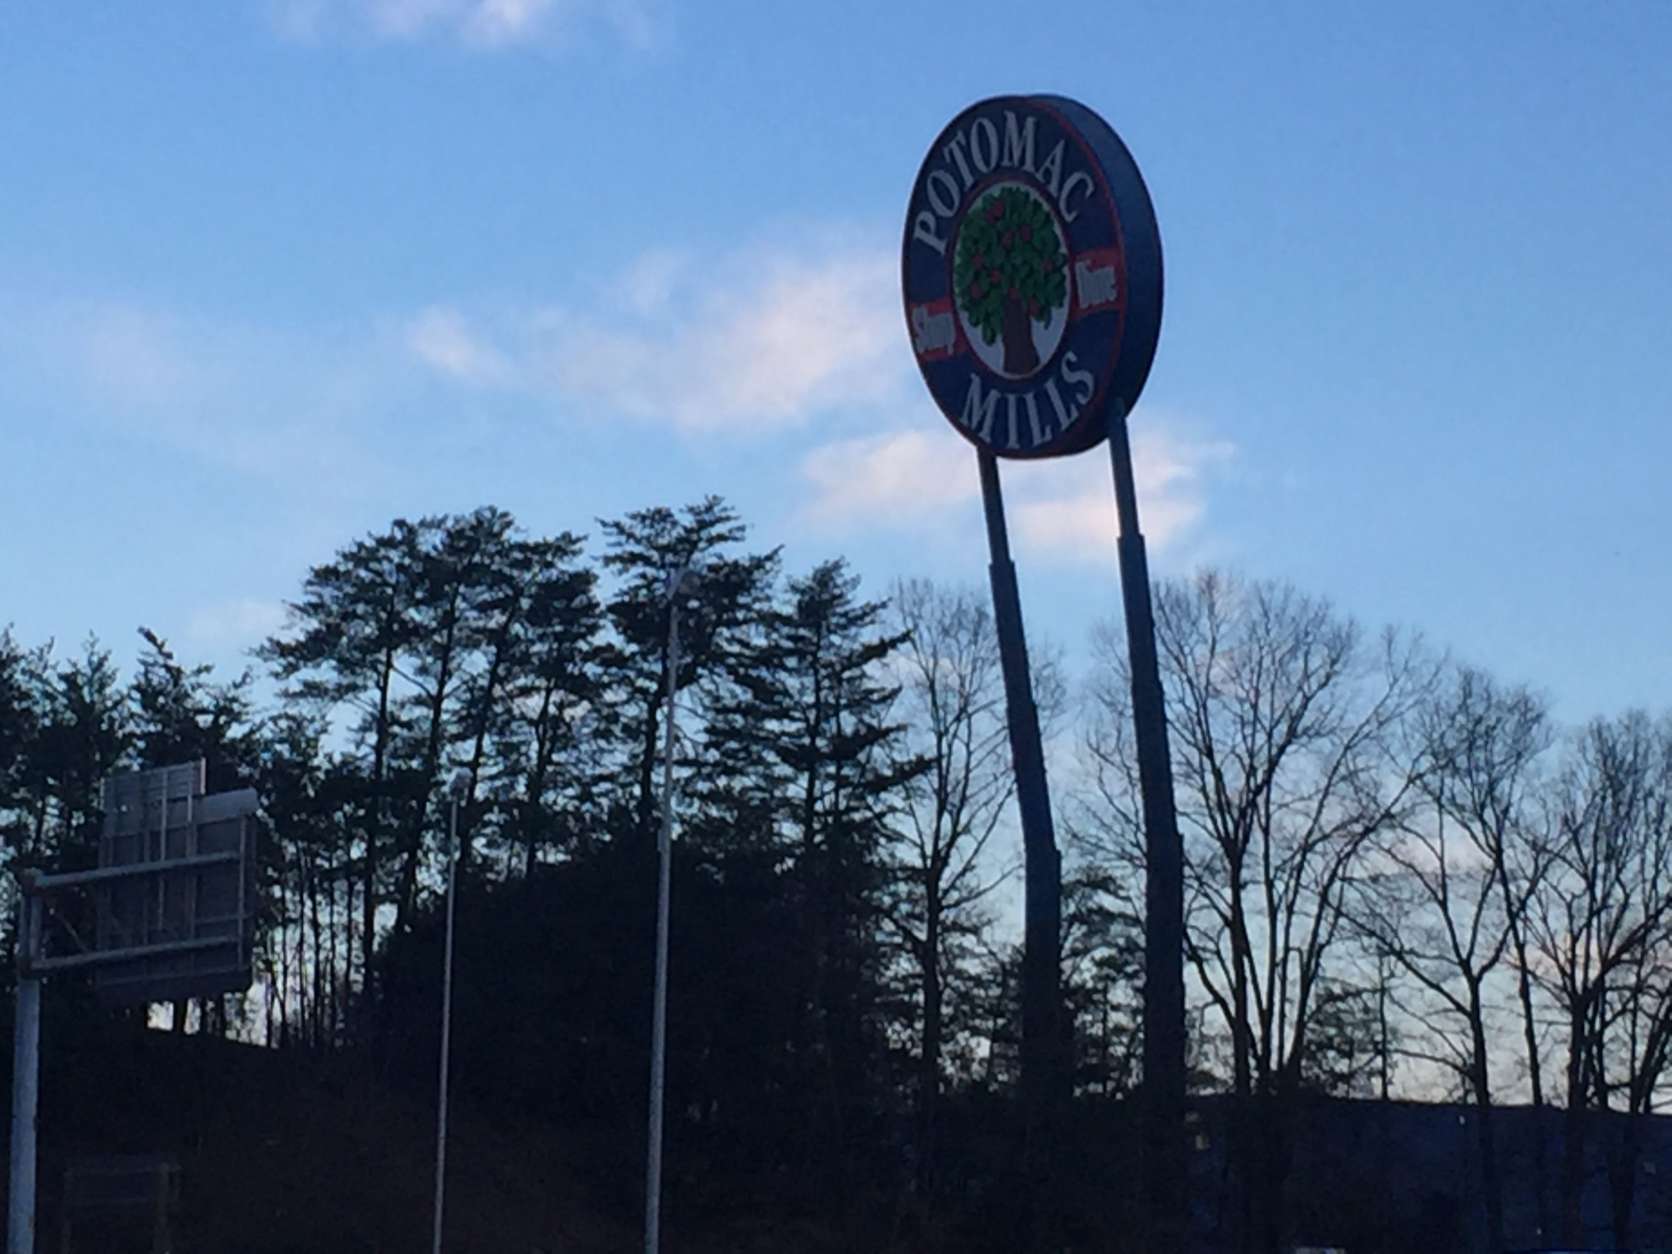 Powerful winds caused the sign for Potomac Mills to lean dangerously last year. (WTOP/John Domen)